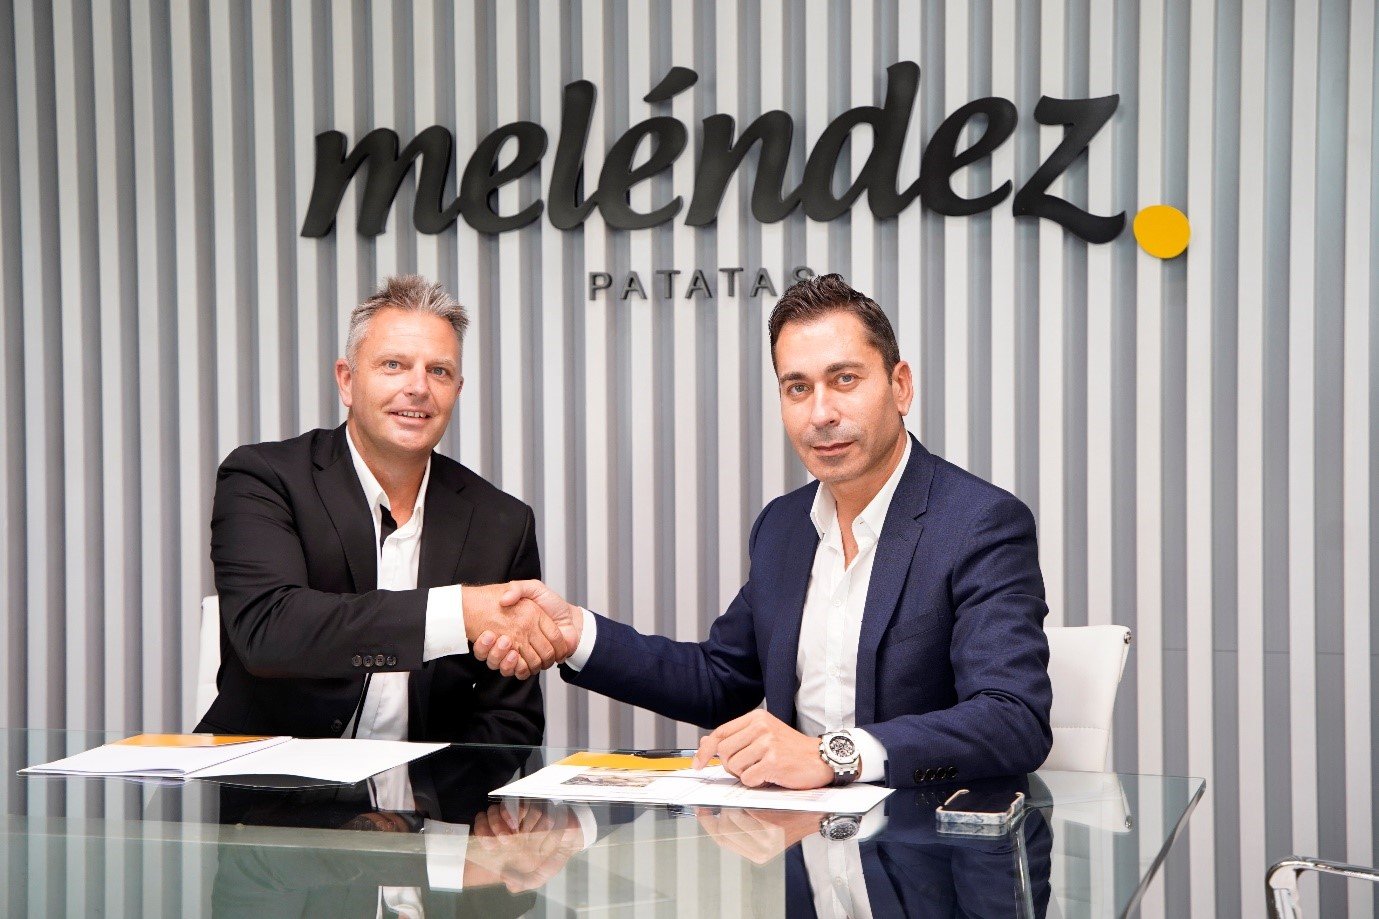 Spain's Patatas Melendez select Wyma to deliver best potato facility in the industry